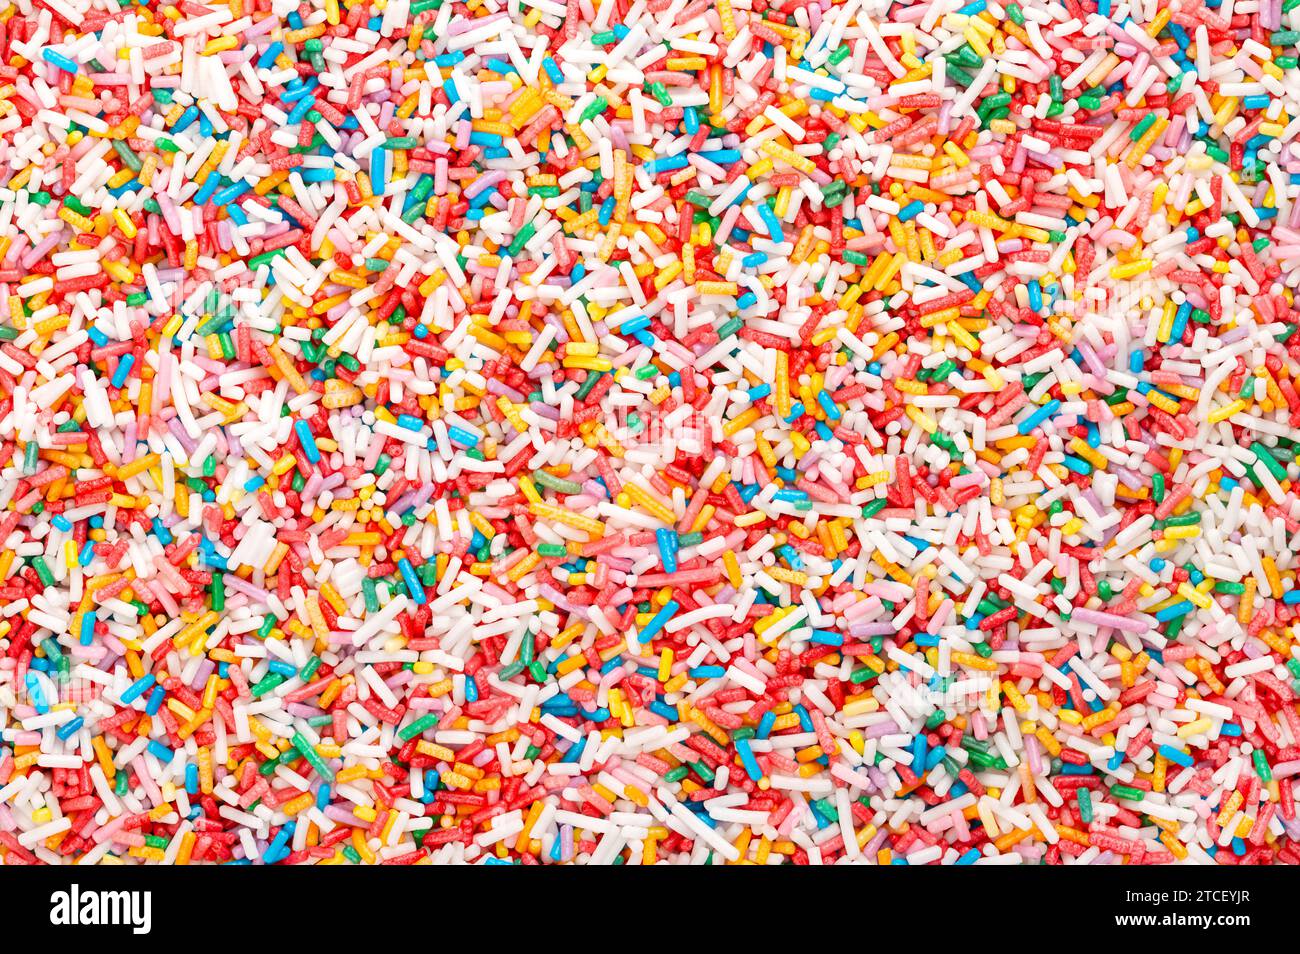 Rainbow sprinkles, background and surface. Rod-shaped colorful sugar sprinkles. Tiny candies in a variety of colors, used as decoration and topping. Stock Photo